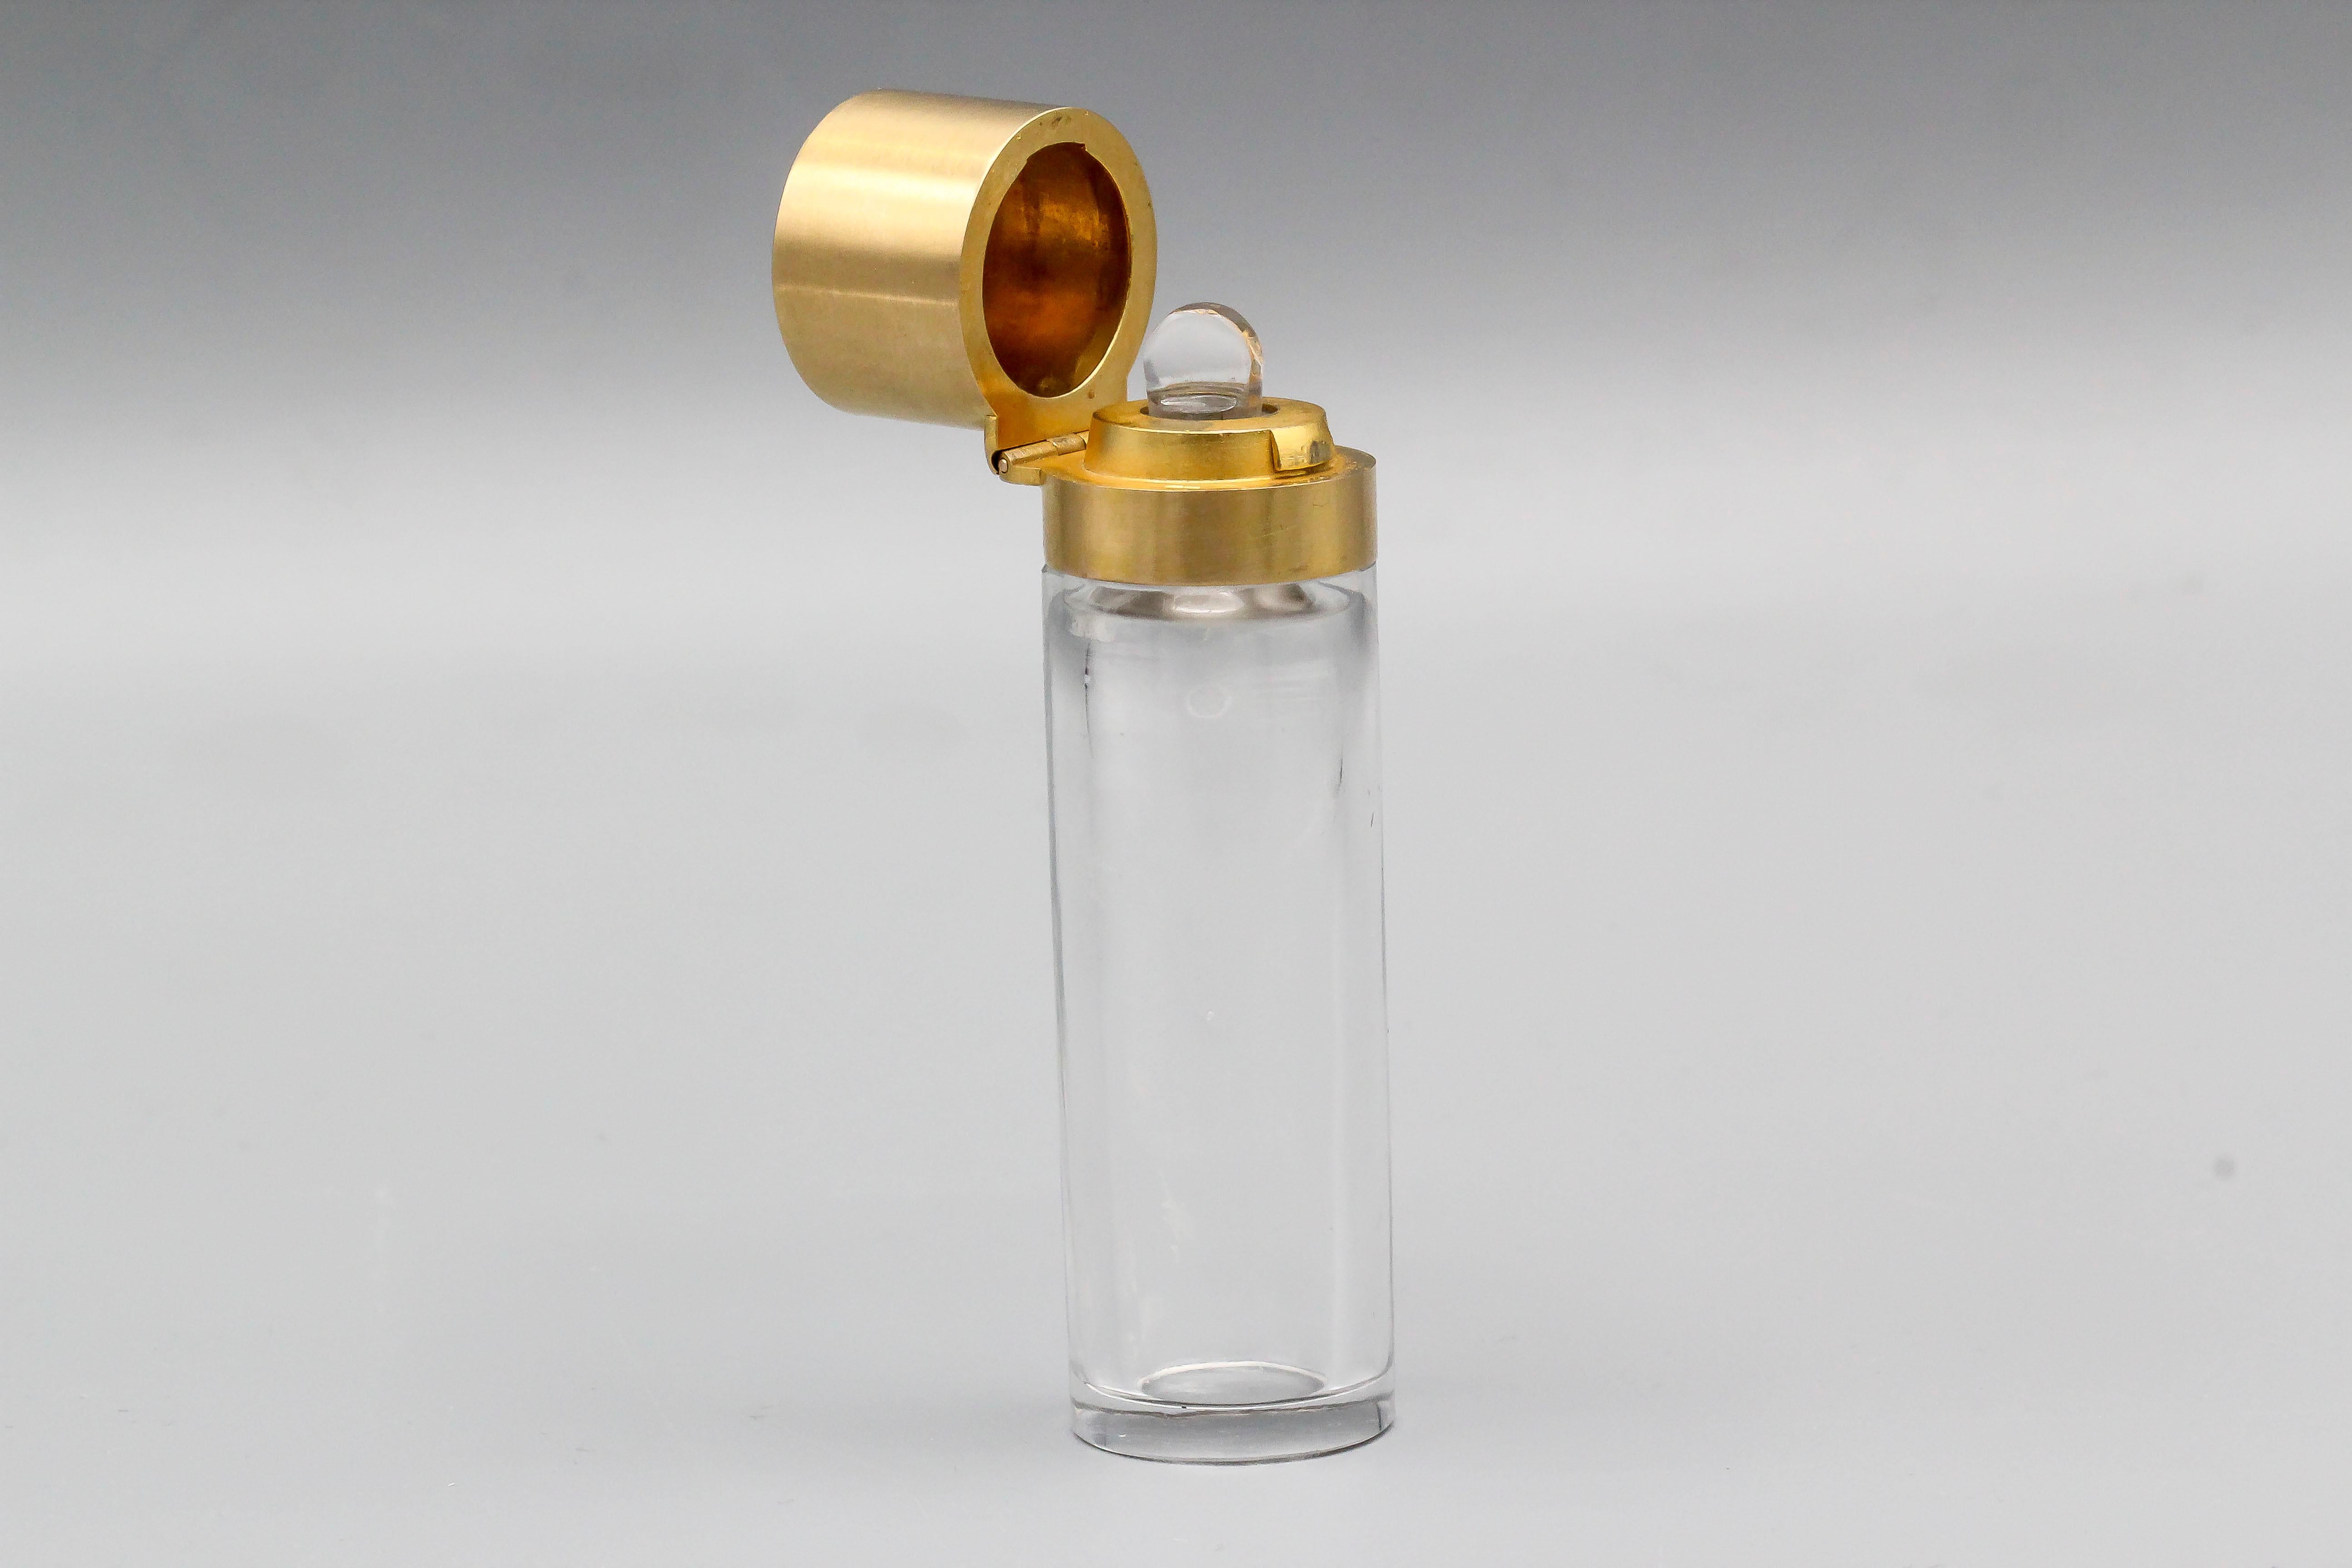 Very rare and unusual diamond, moonstone and 14K yellow gold perfume bottle/flask made by Faberge, circa late 19th century. It features high grade diamonds along with a cabochon moonstone in the middle. Container is made of clear glass. Made by E.